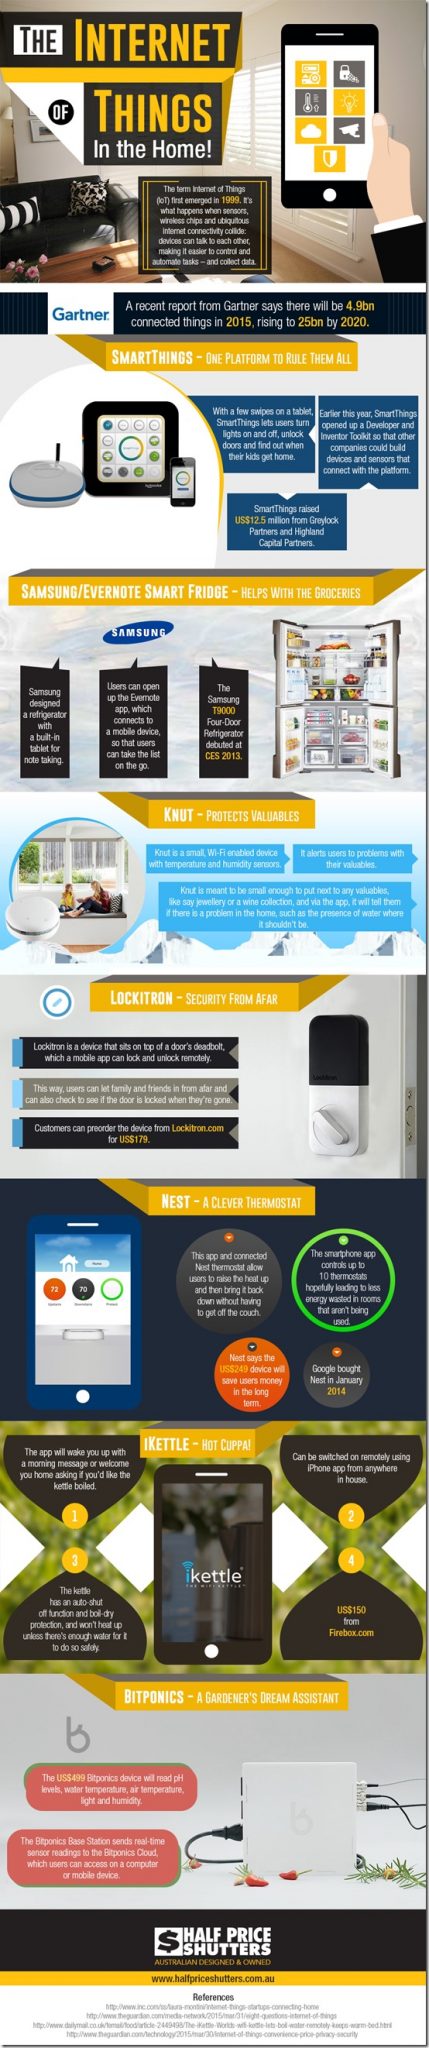 The Internet Of Things In The Home!